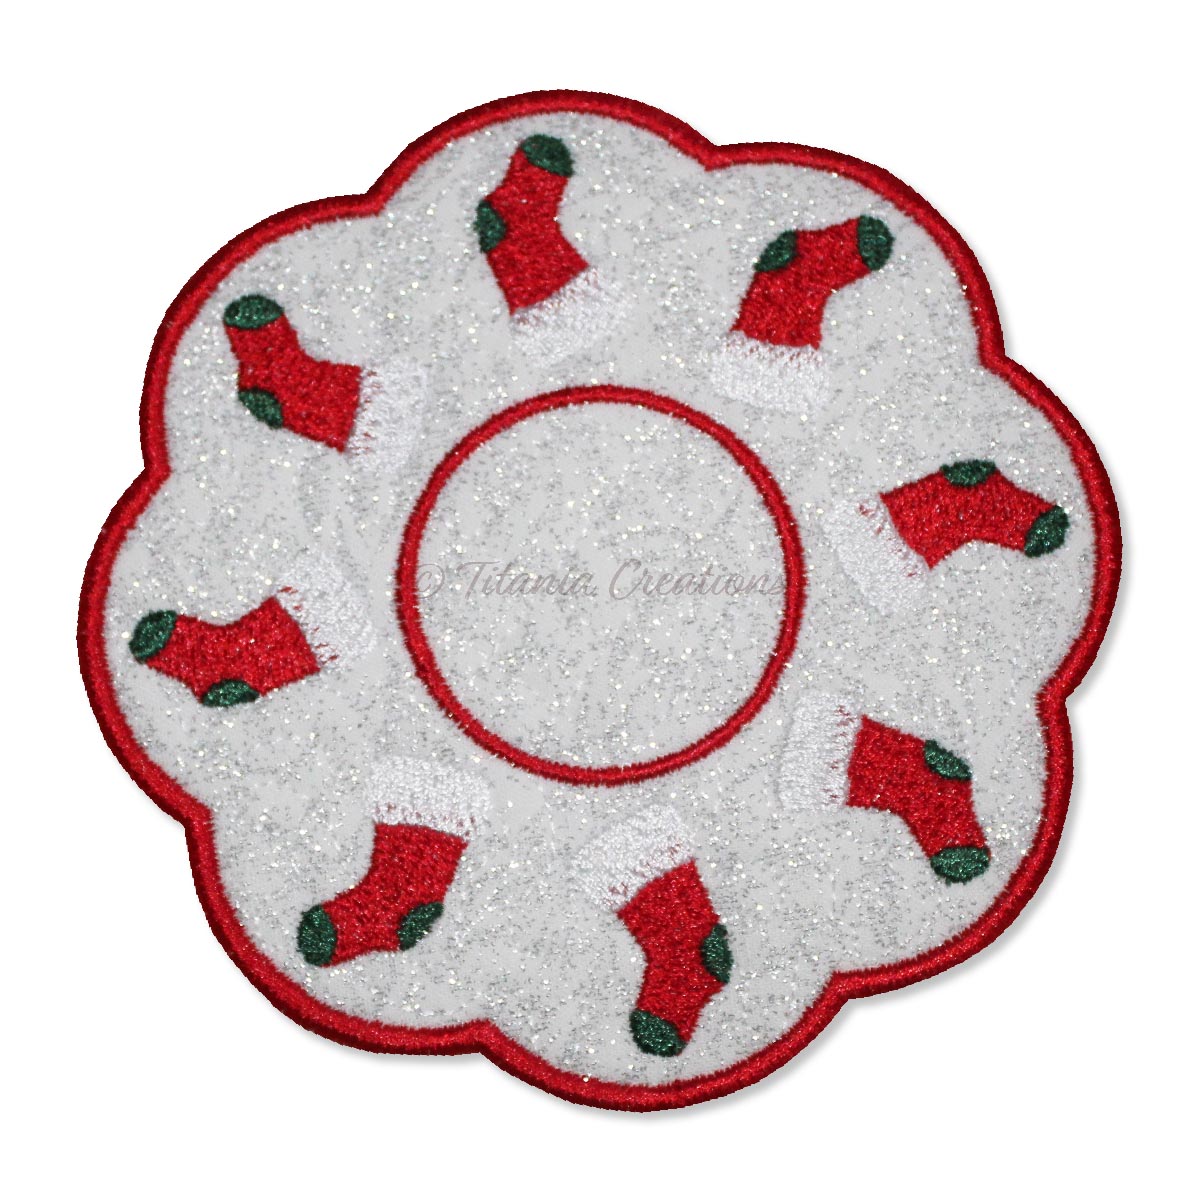 ITH Christmas Stocking Candle Mat 5x5 6x6 7x7 8x8